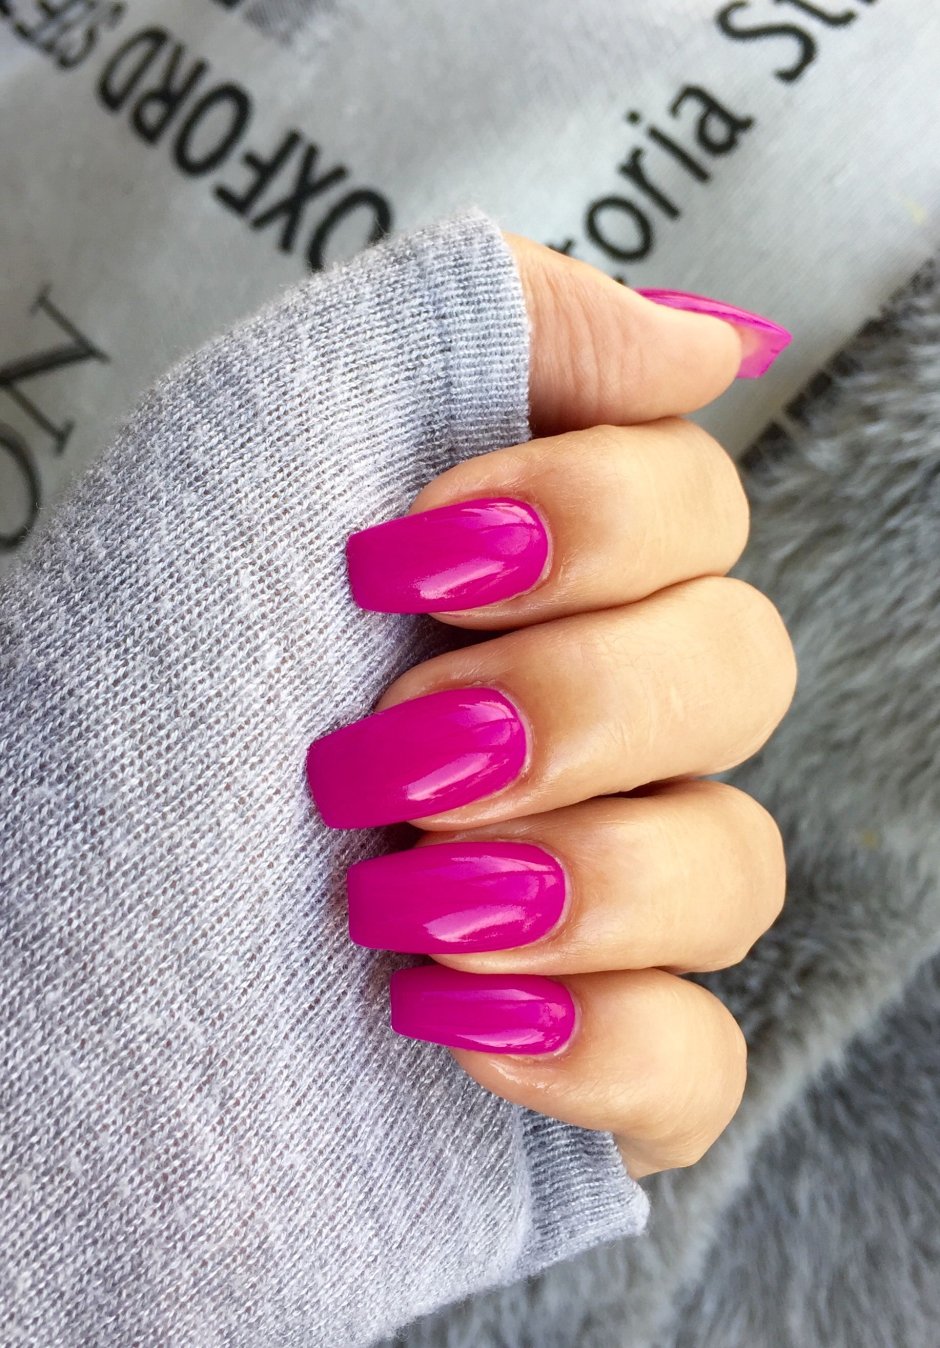 Nail Extension, Gel Nail Polish, Pedicure Manicures in Pune